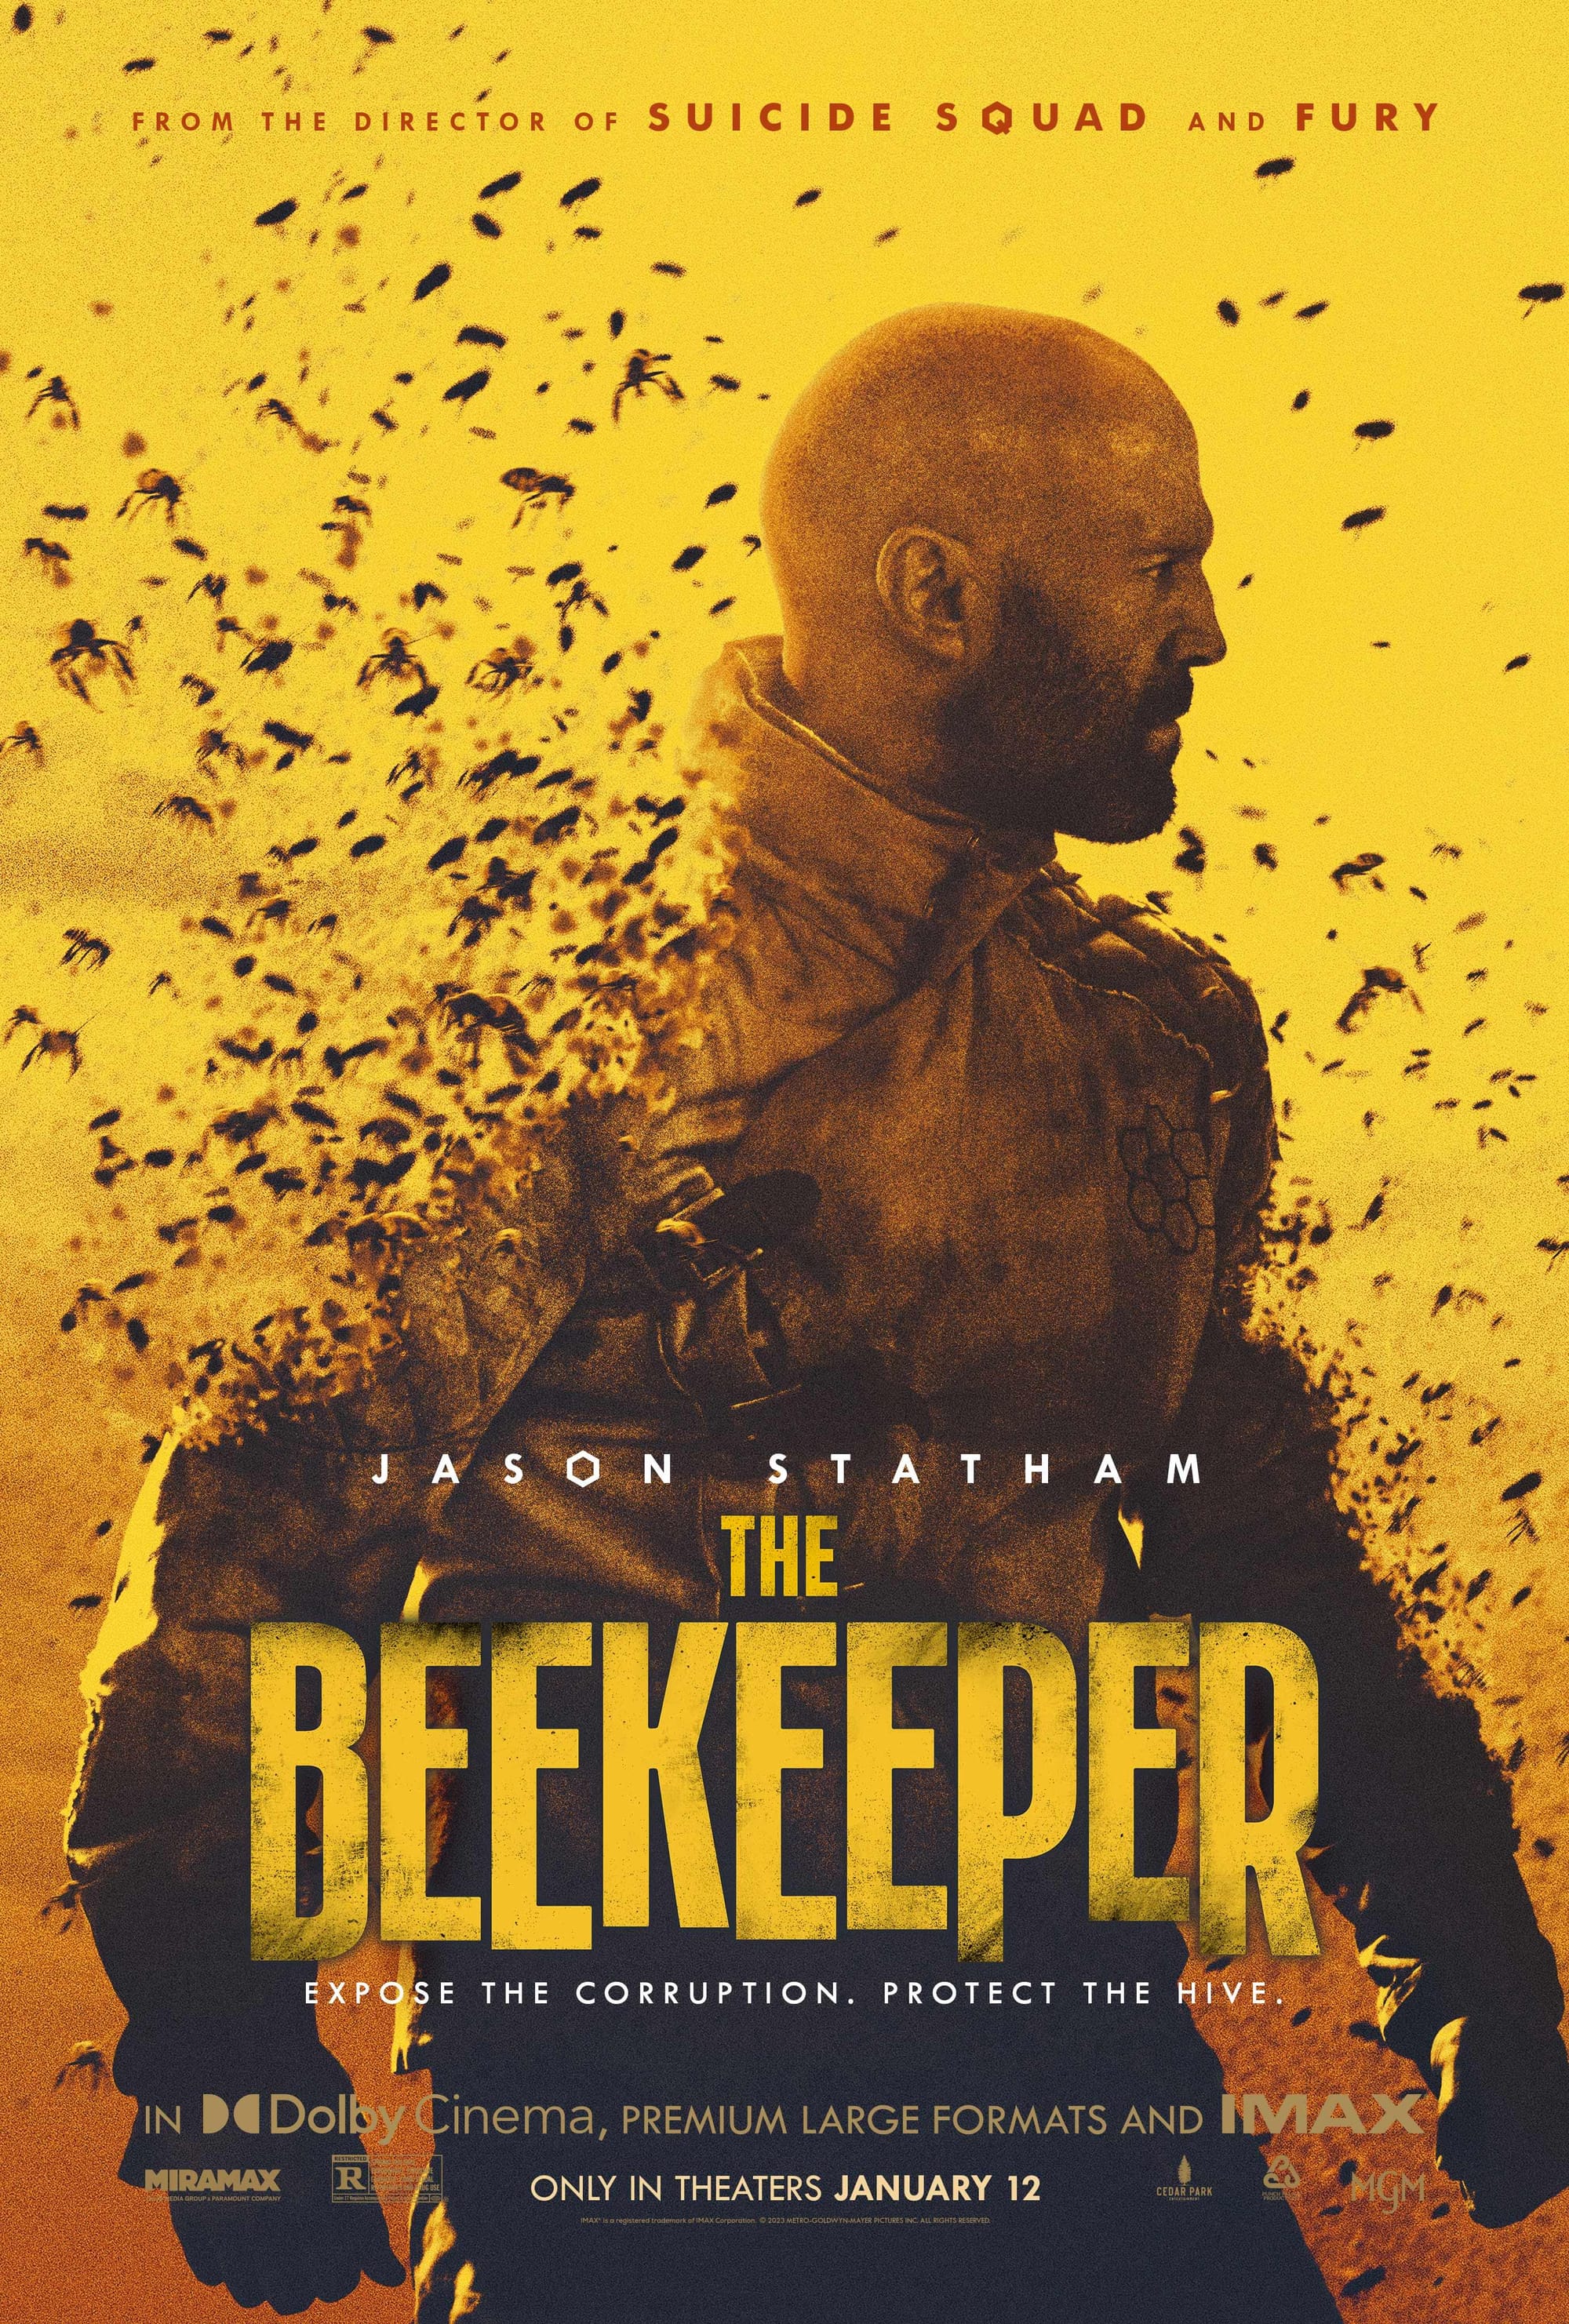 The movie poster for The Beekeeper